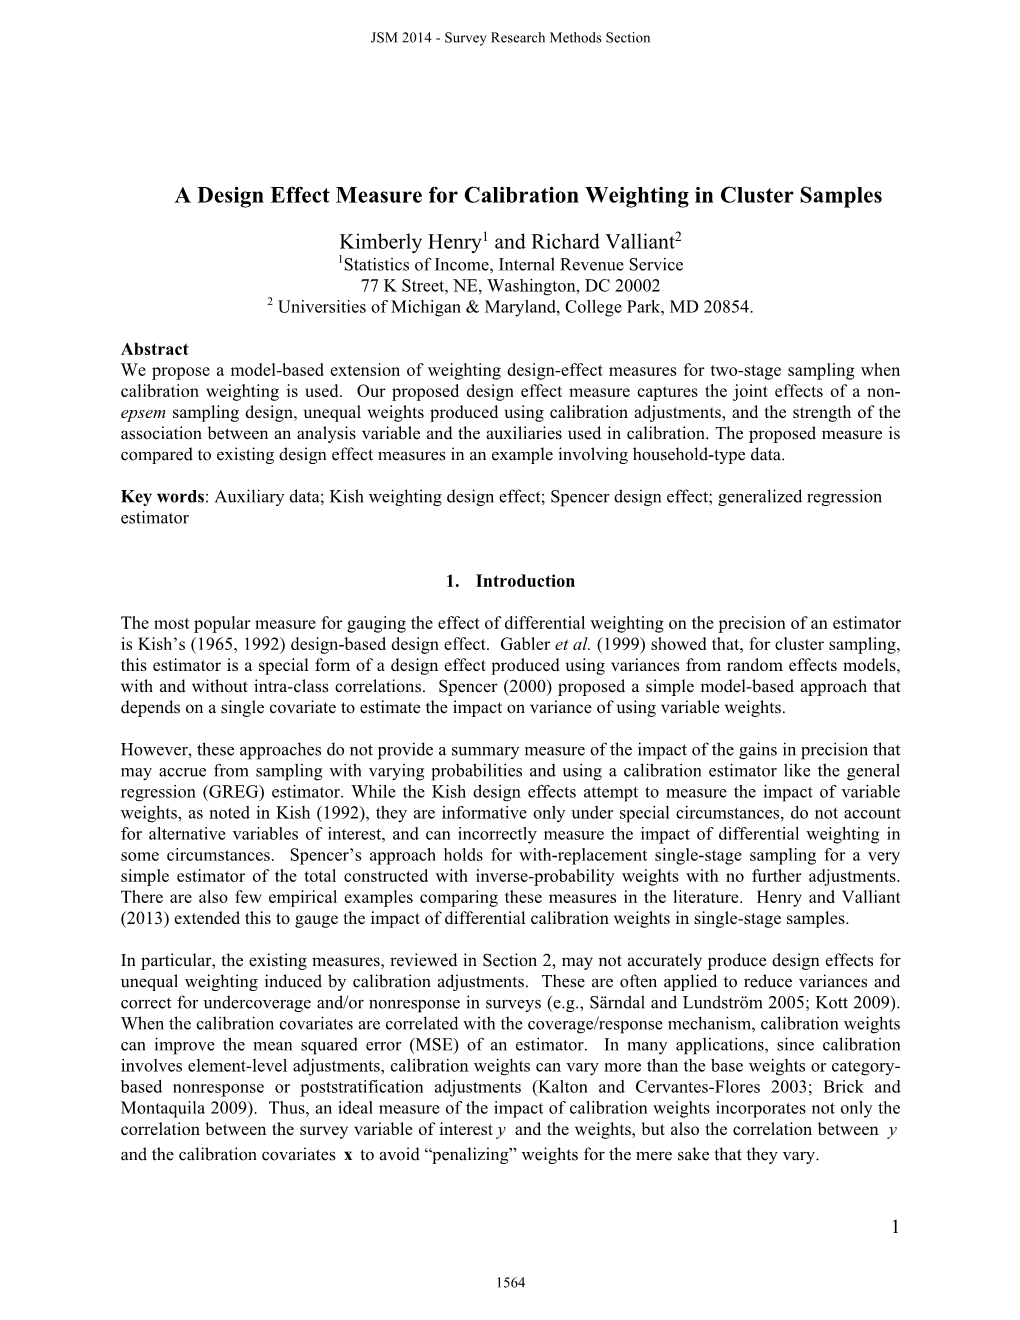 A Design Effect Measure for Calibration Weighting in Cluster Samples